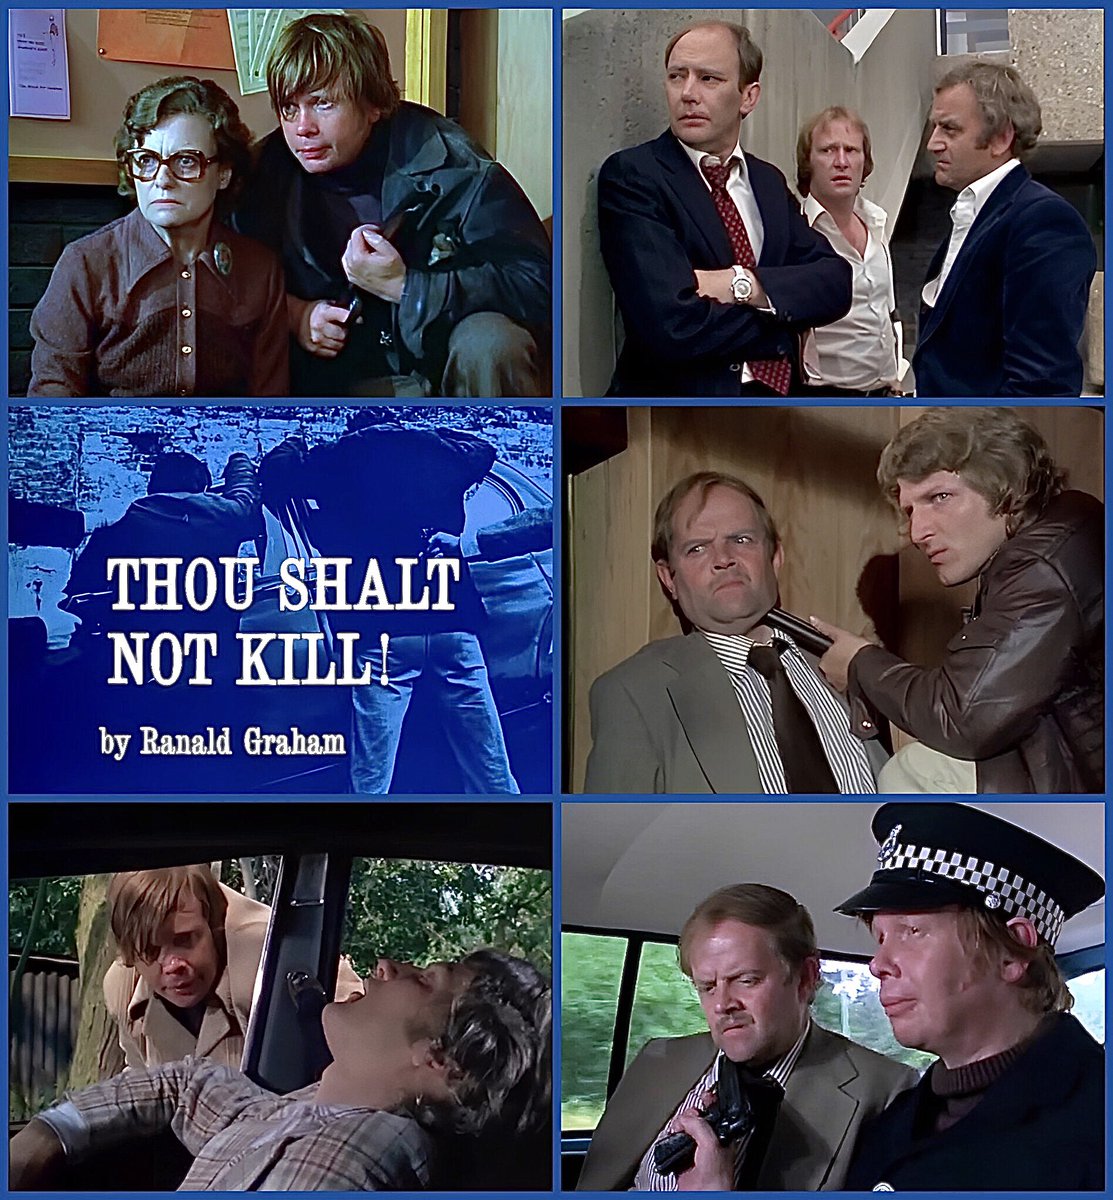 Remembering the late 🇬🇧British actor #RonaldLacey #BOTD in 1935 in #Harrow, seen here as the disturbed & violent criminal Barry Monk in the episode 'Thou Shalt Not Kill' (1975) from the #ThamesTelevision seventies crime series 'THE SWEENEY' dir. Douglas Camfield
@MistyMoonEvents